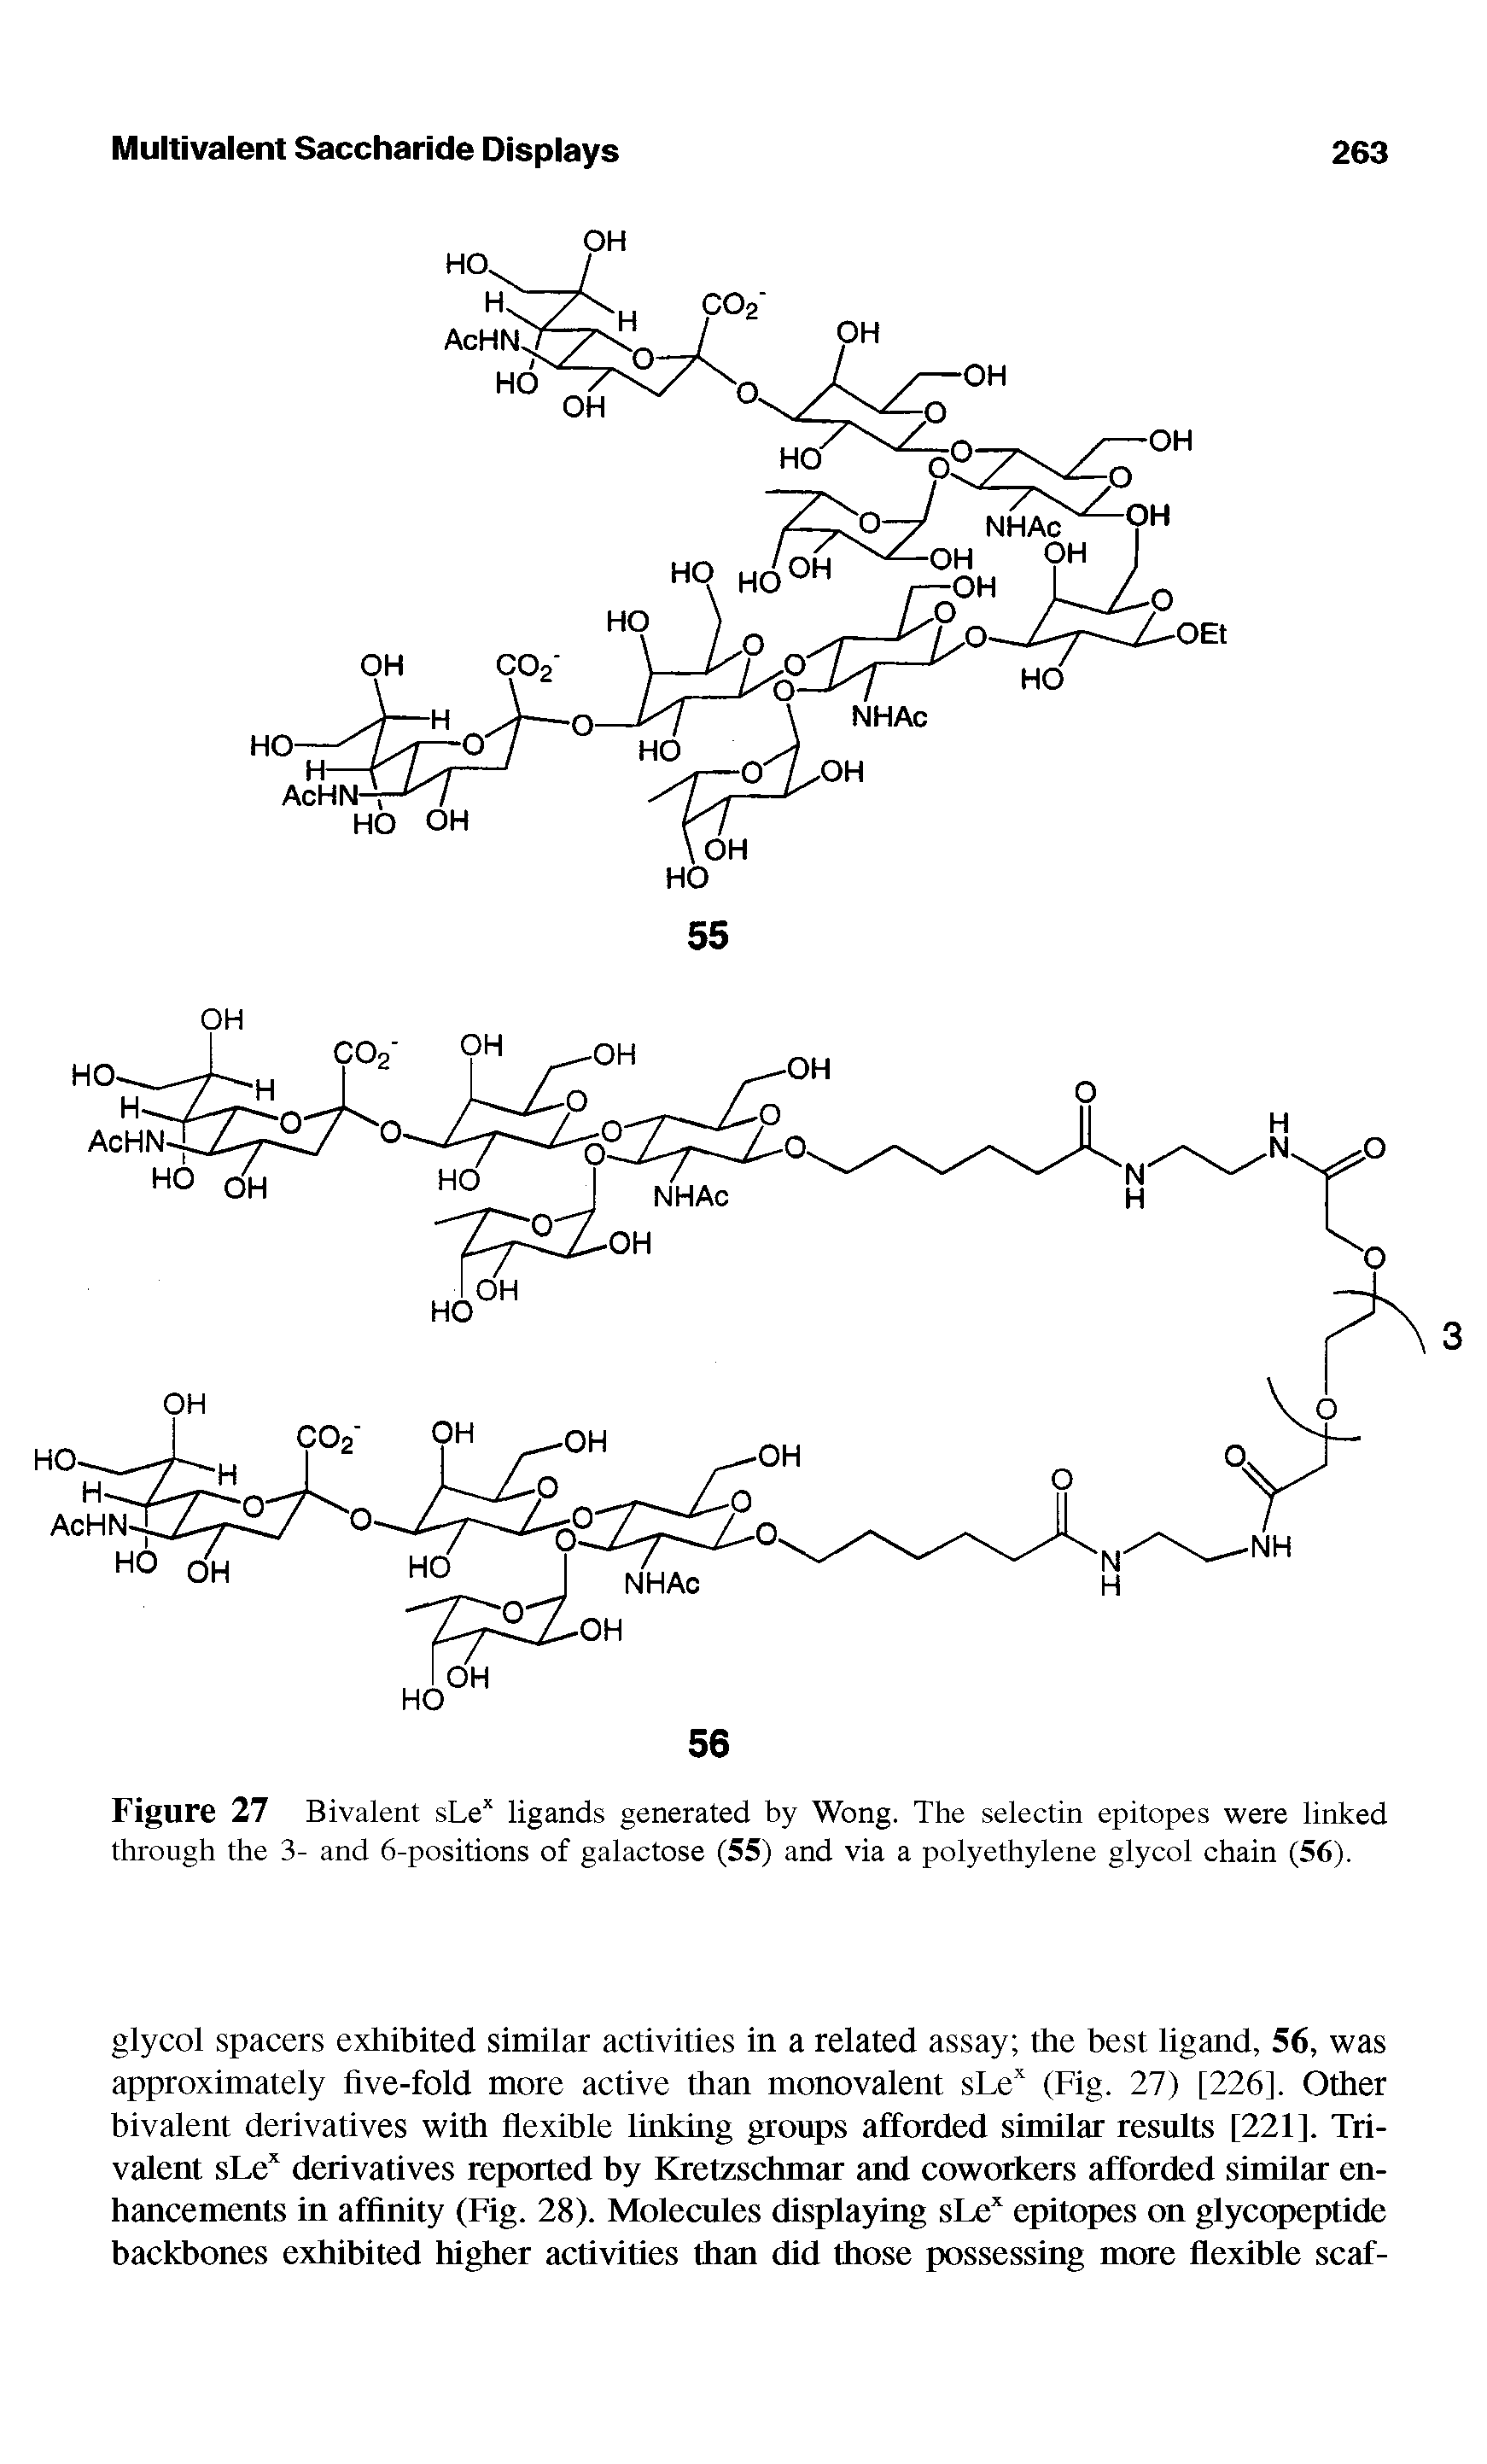 Figure 27 Bivalent sLe ligands generated by Wong. The selectin epitopes were linked through the 3- and 6-positions of galactose (55) and via a polyethylene glycol chain (56).